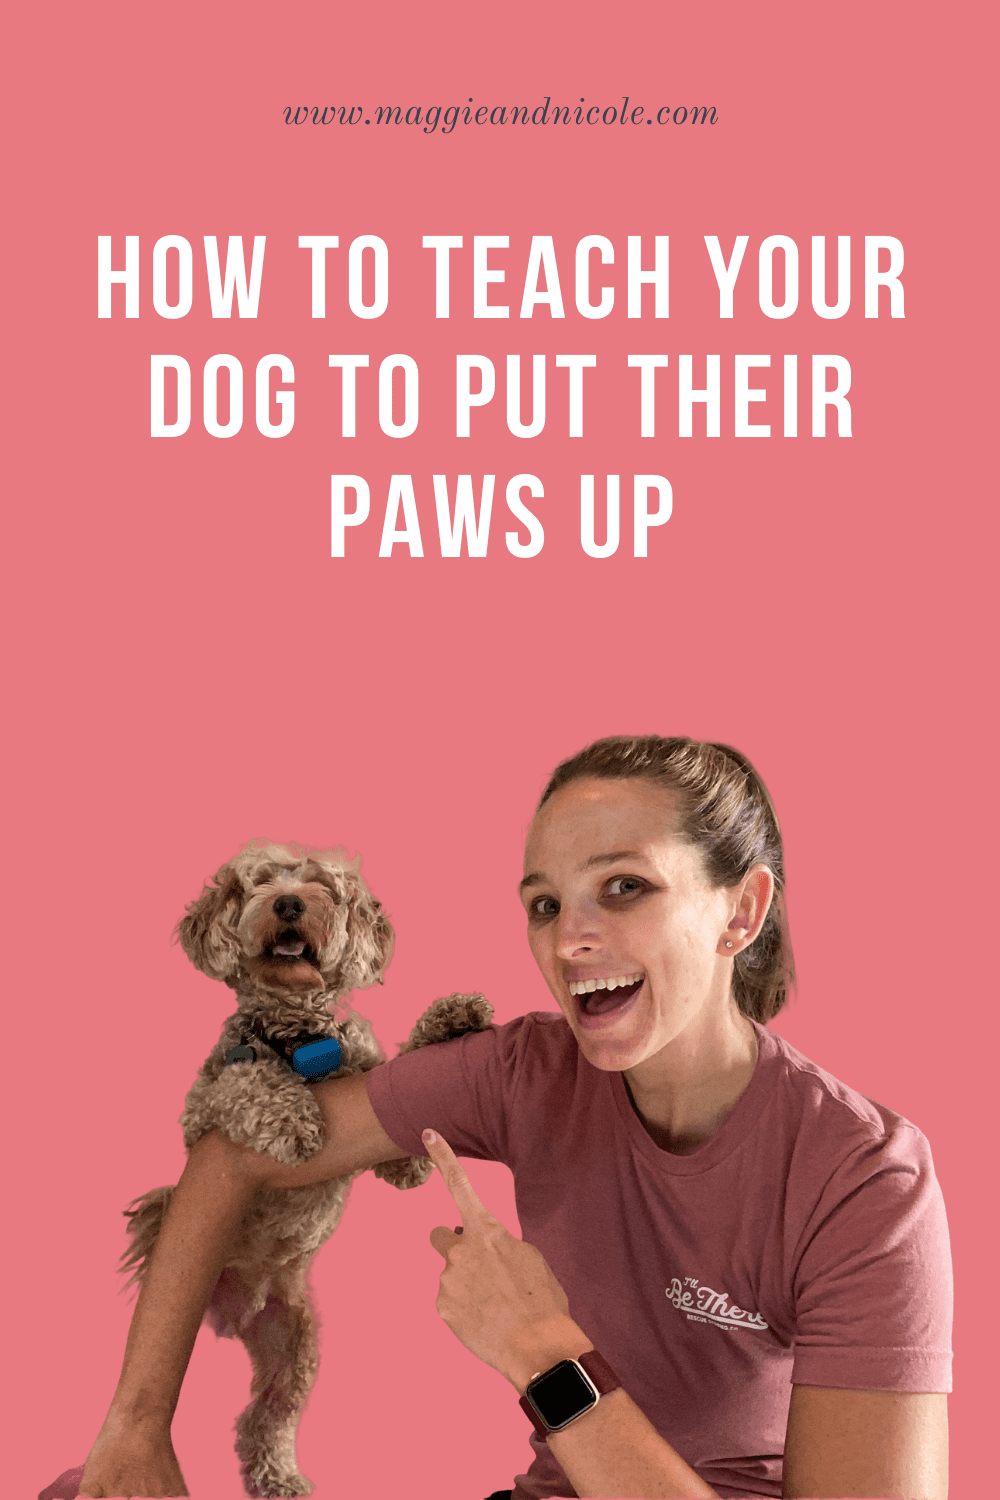 The first things to train a new puppy